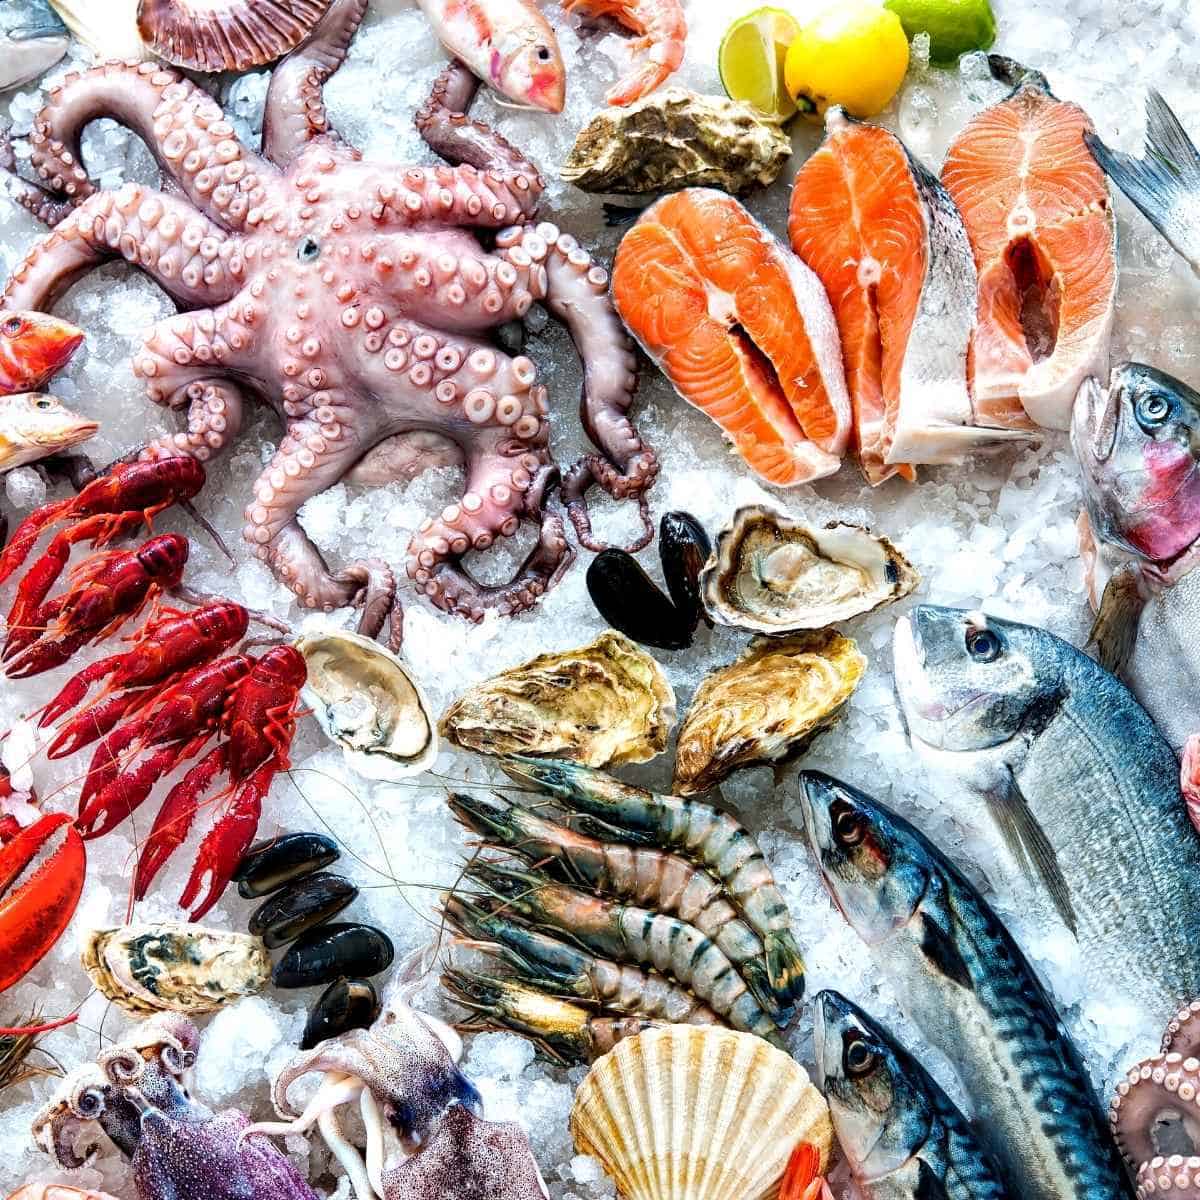 lots of seafood for keto - Is Dry Shrimp Keto? A Nutritionist Ways in with Recipes